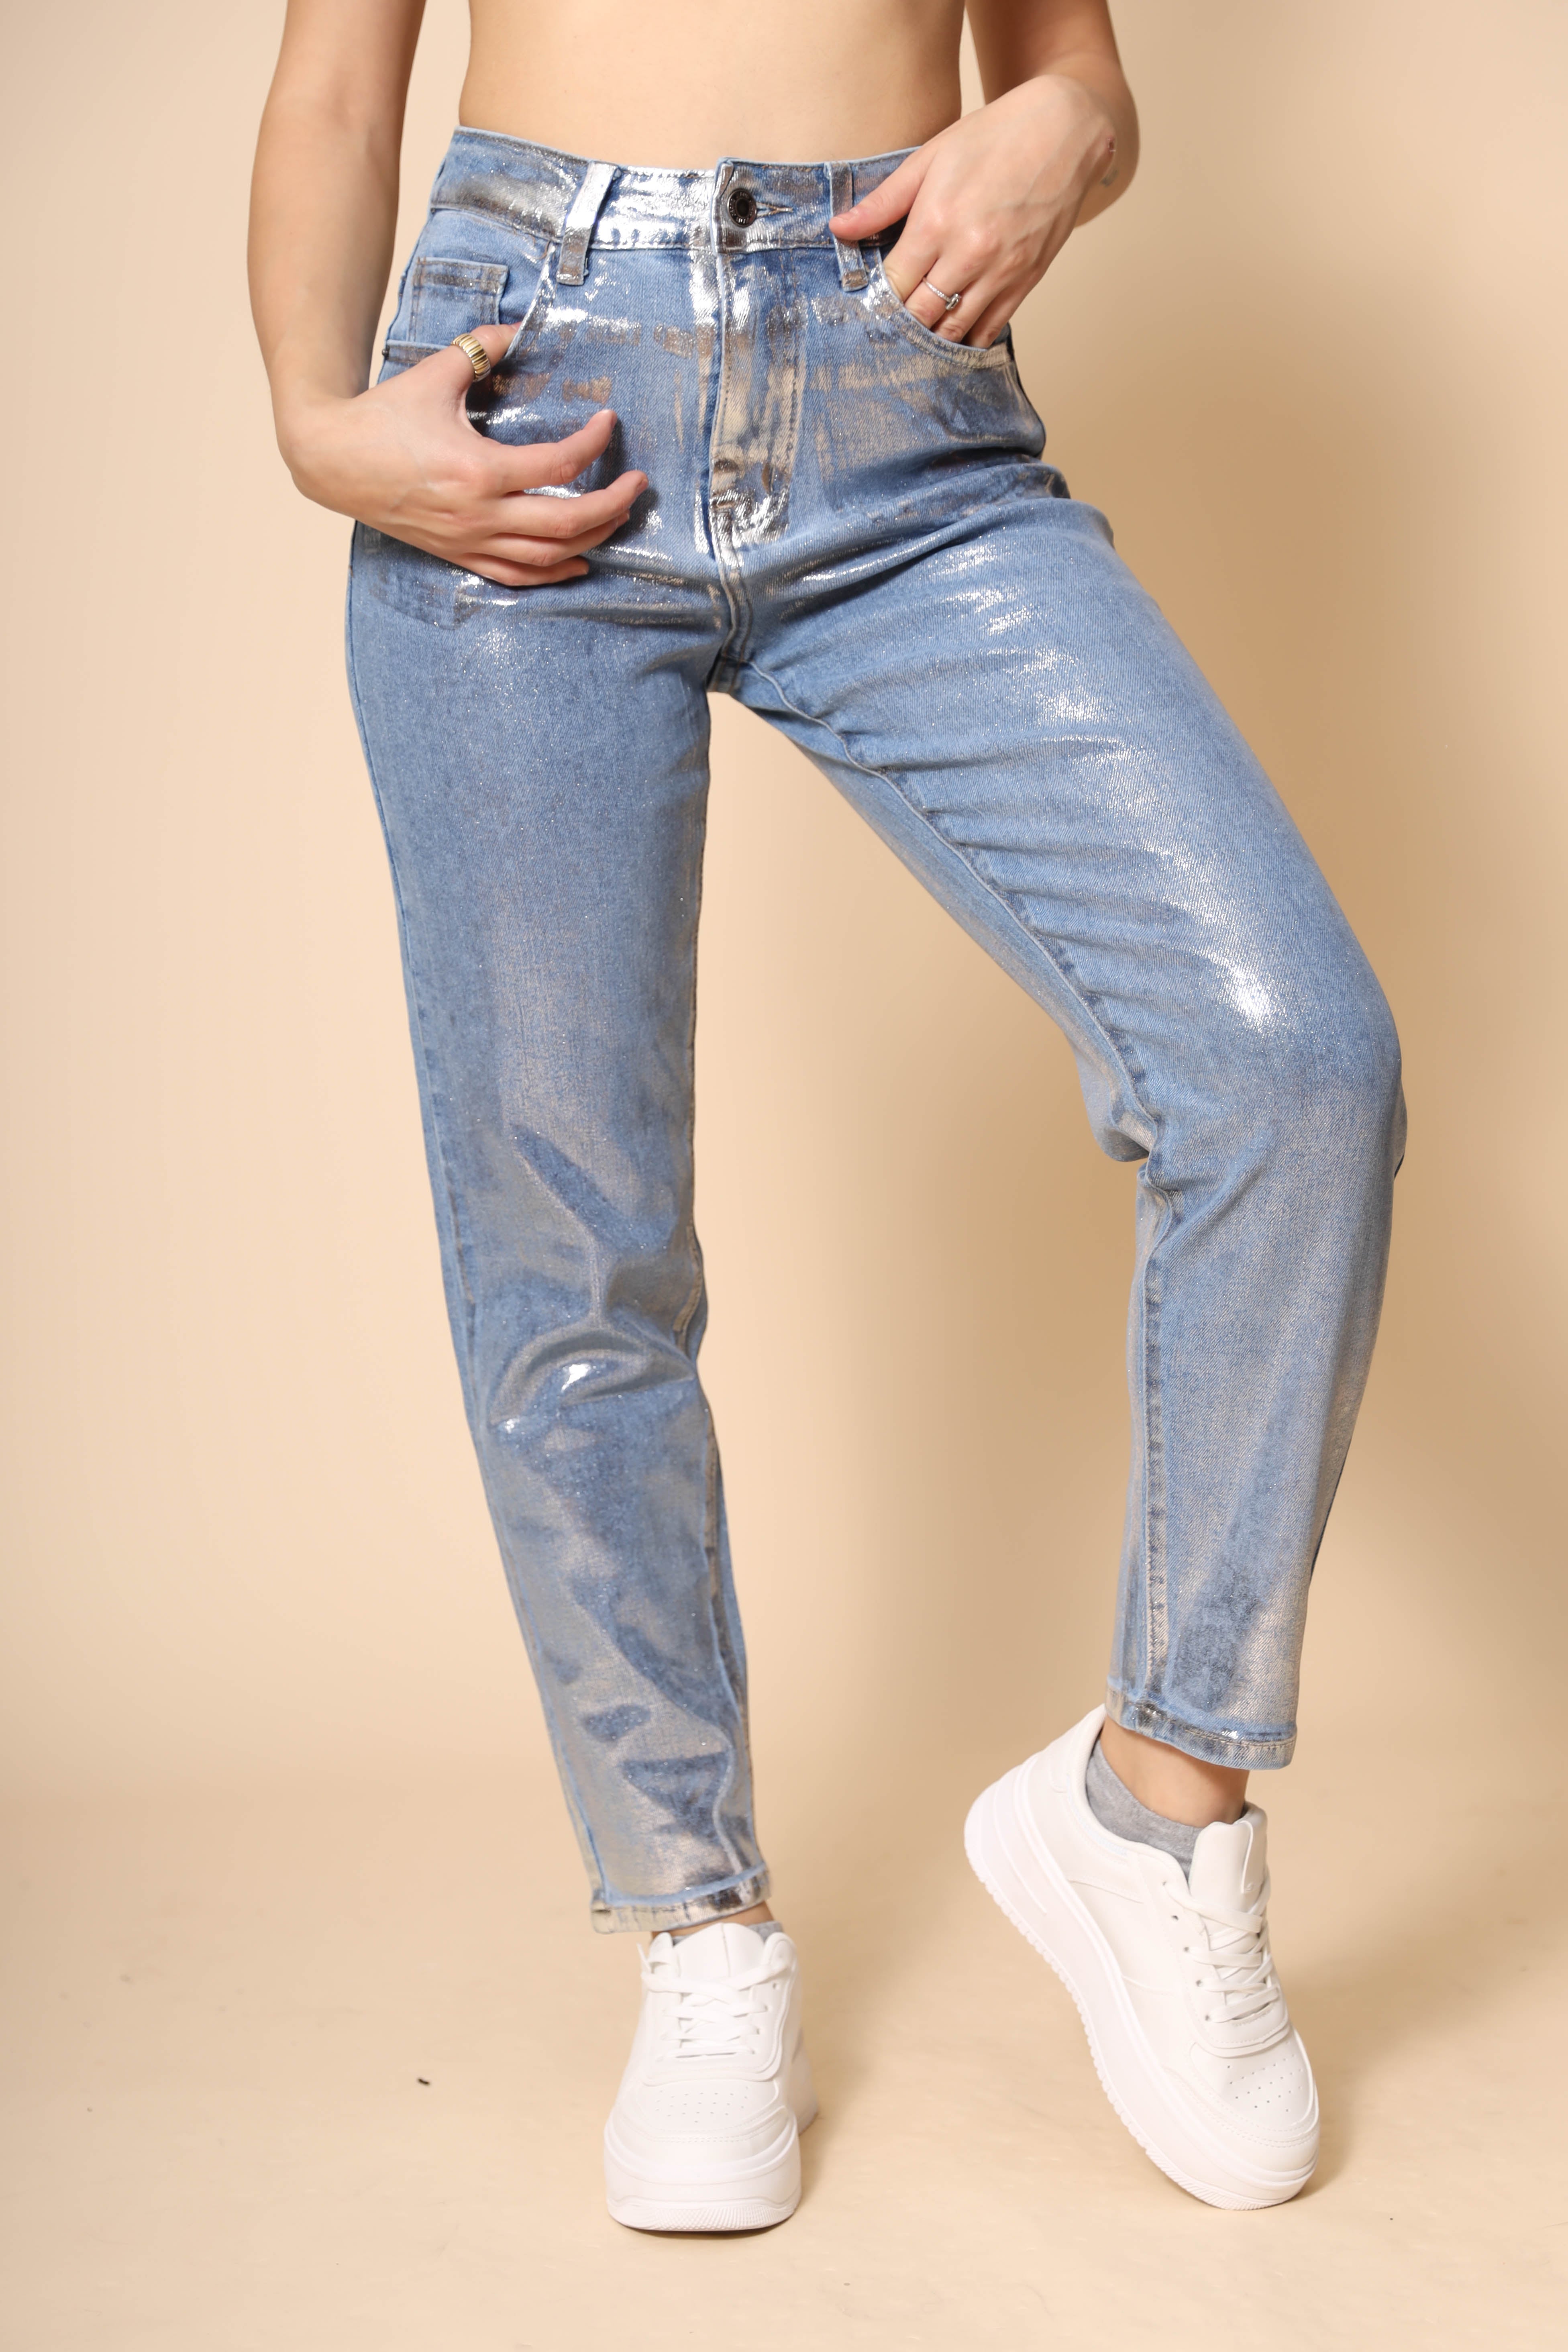 Jeans Mirror in promo